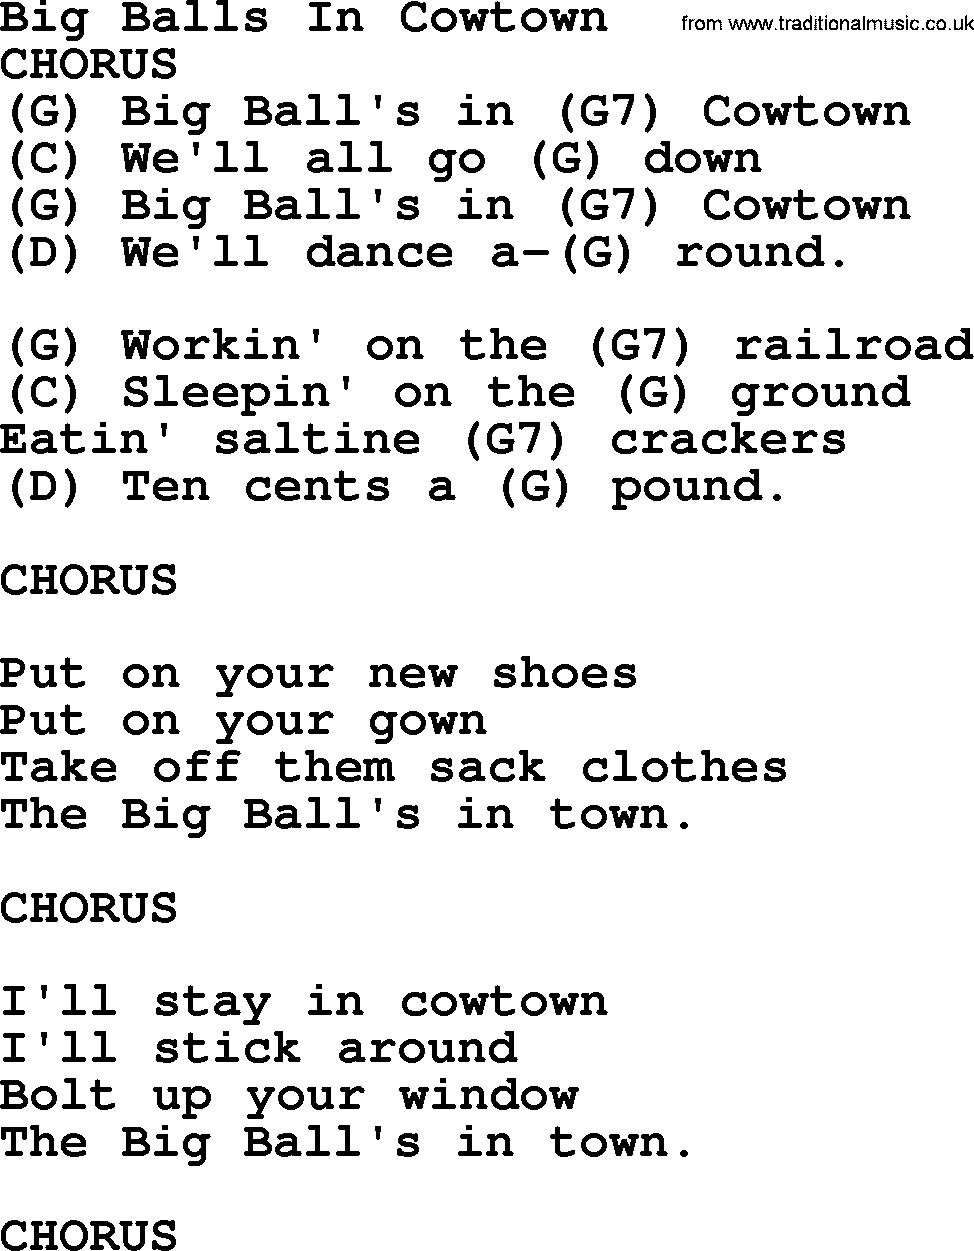 Bluegrass song: Big Balls In Cowtown, lyrics and chords